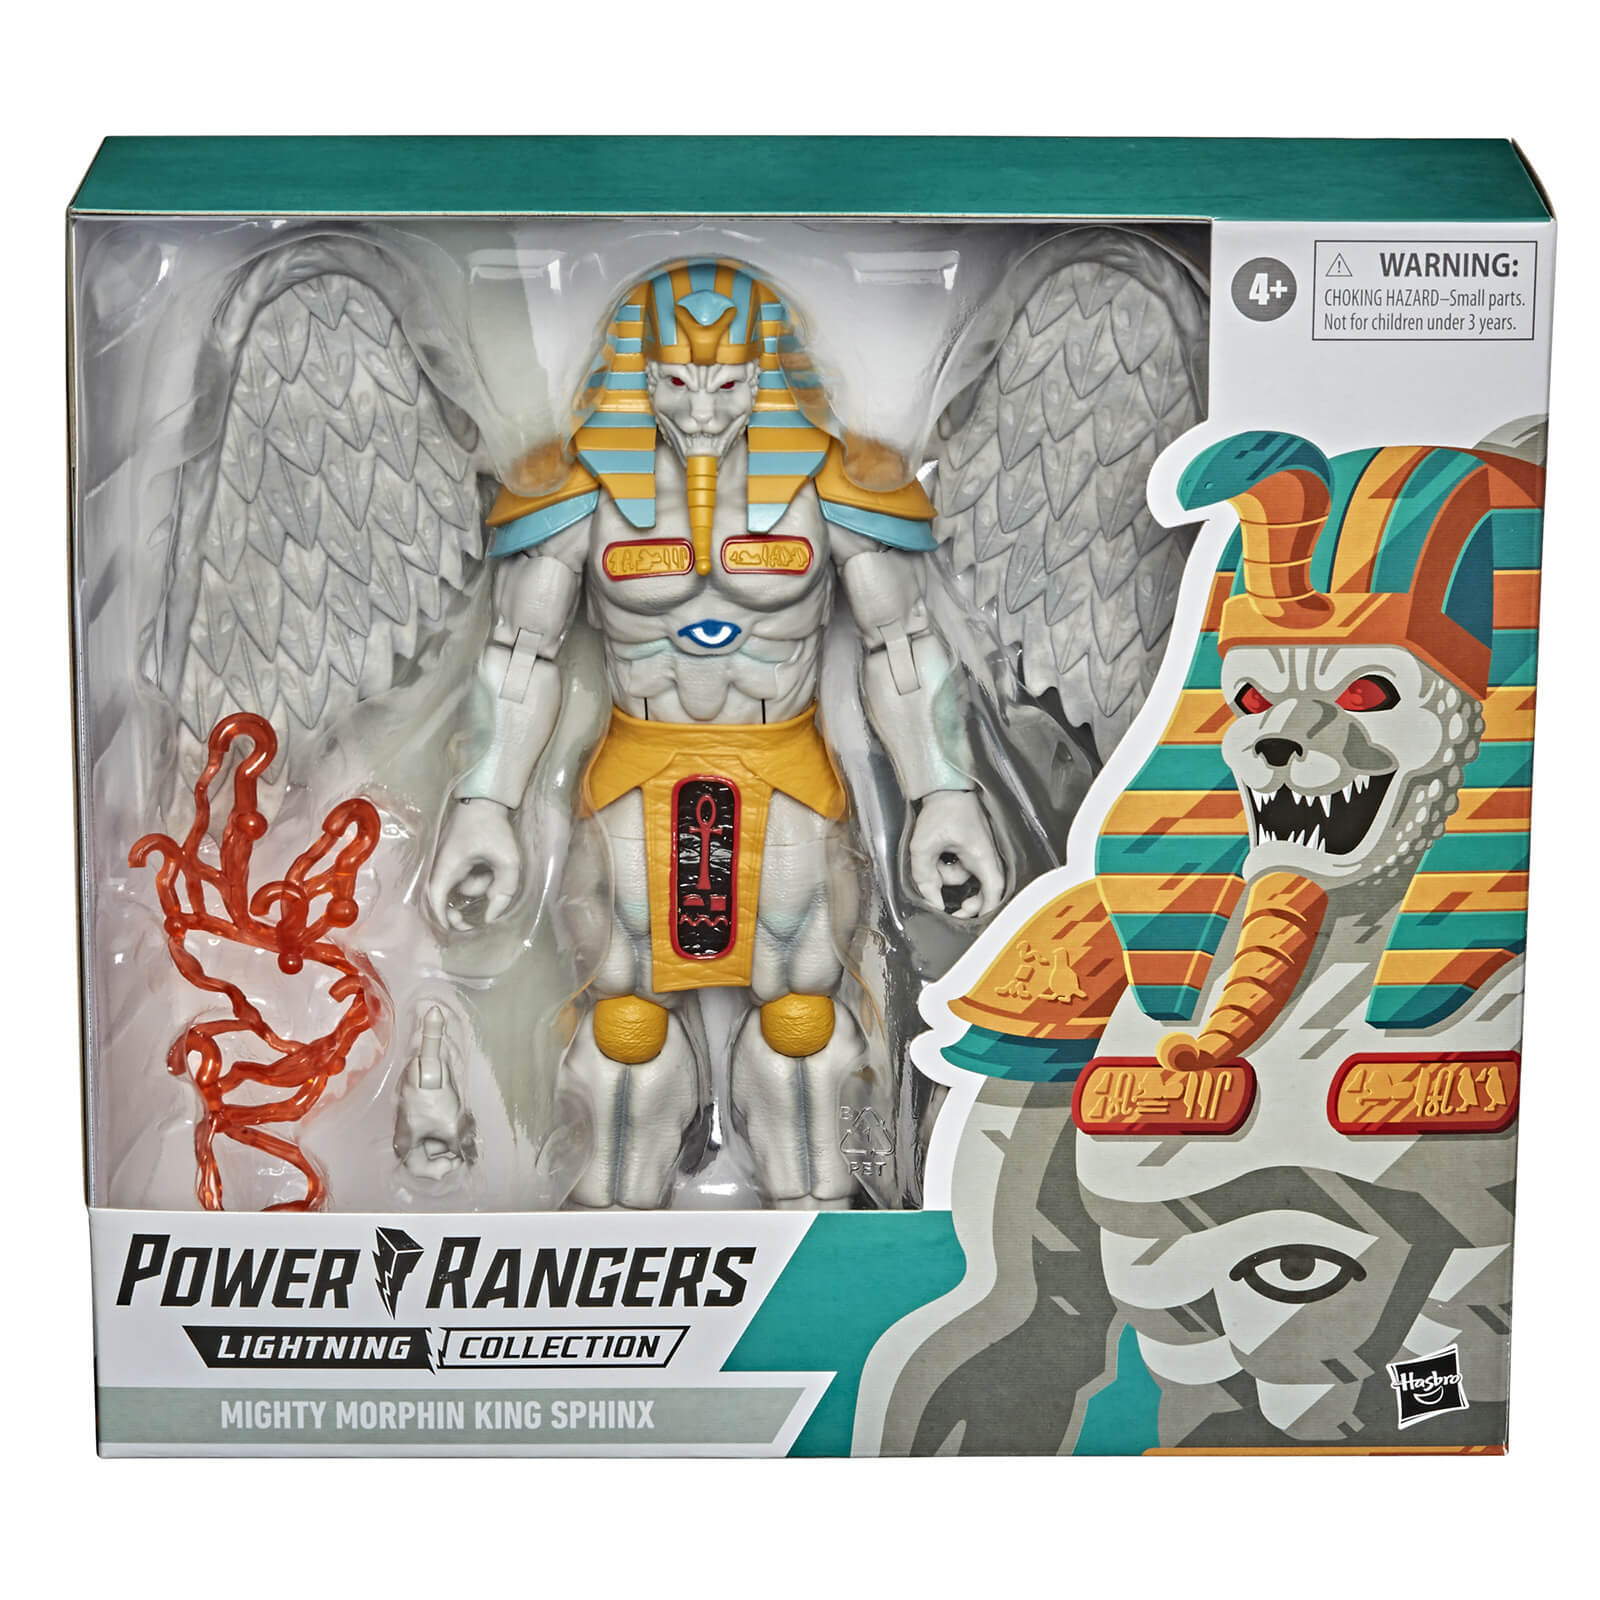 Hasbro Power Rangers Lightning Collection Monsters Mighty Morphin King Sphinx Action Figure